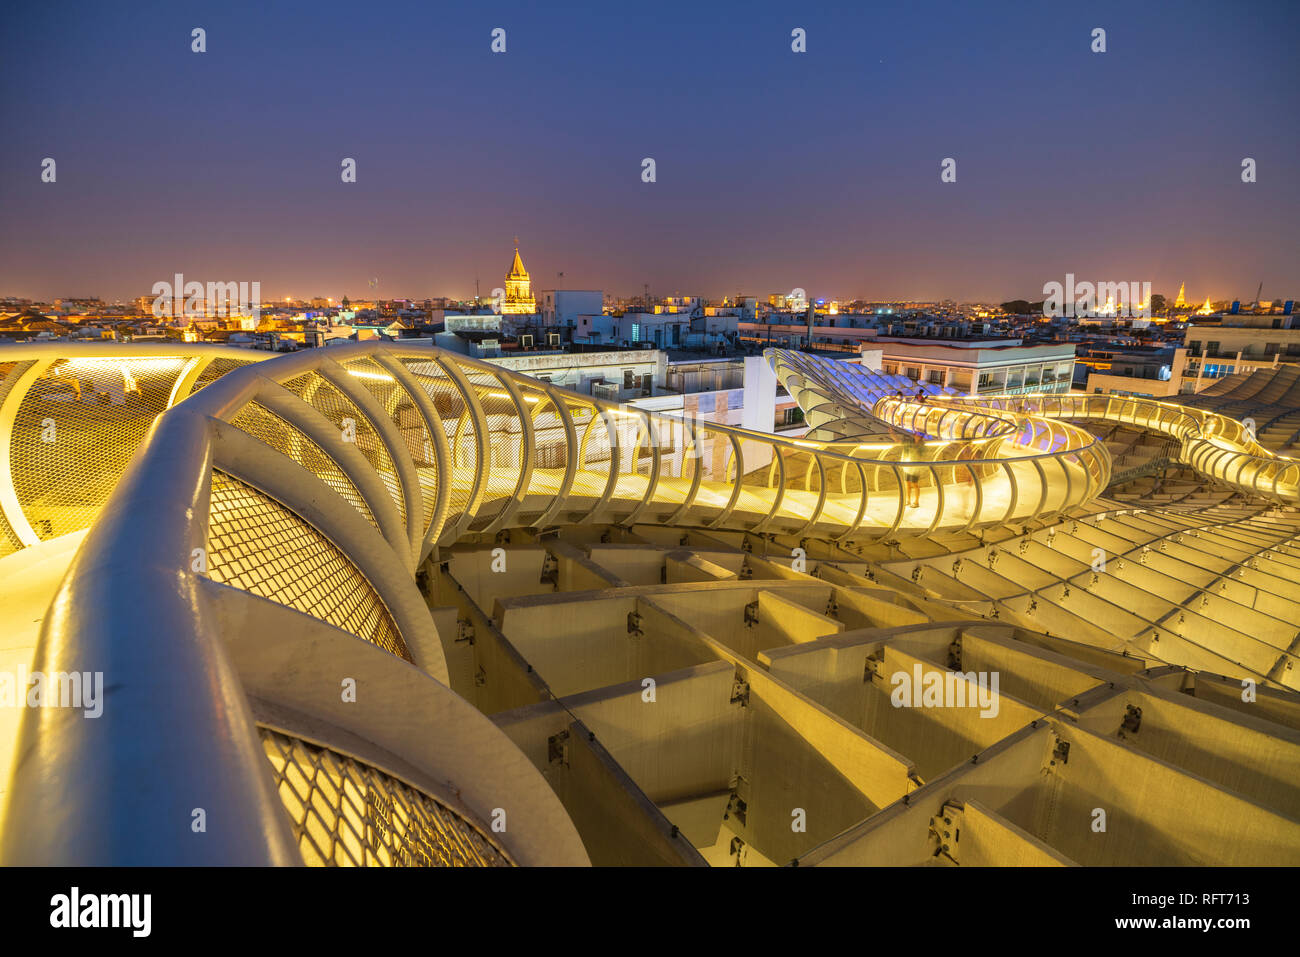 Illuminated spiral curved walkways on rooftop of the Metropol Parasol, Plaza de la Encarnacion, Seville, Andalusia, Spain, Europe Stock Photo